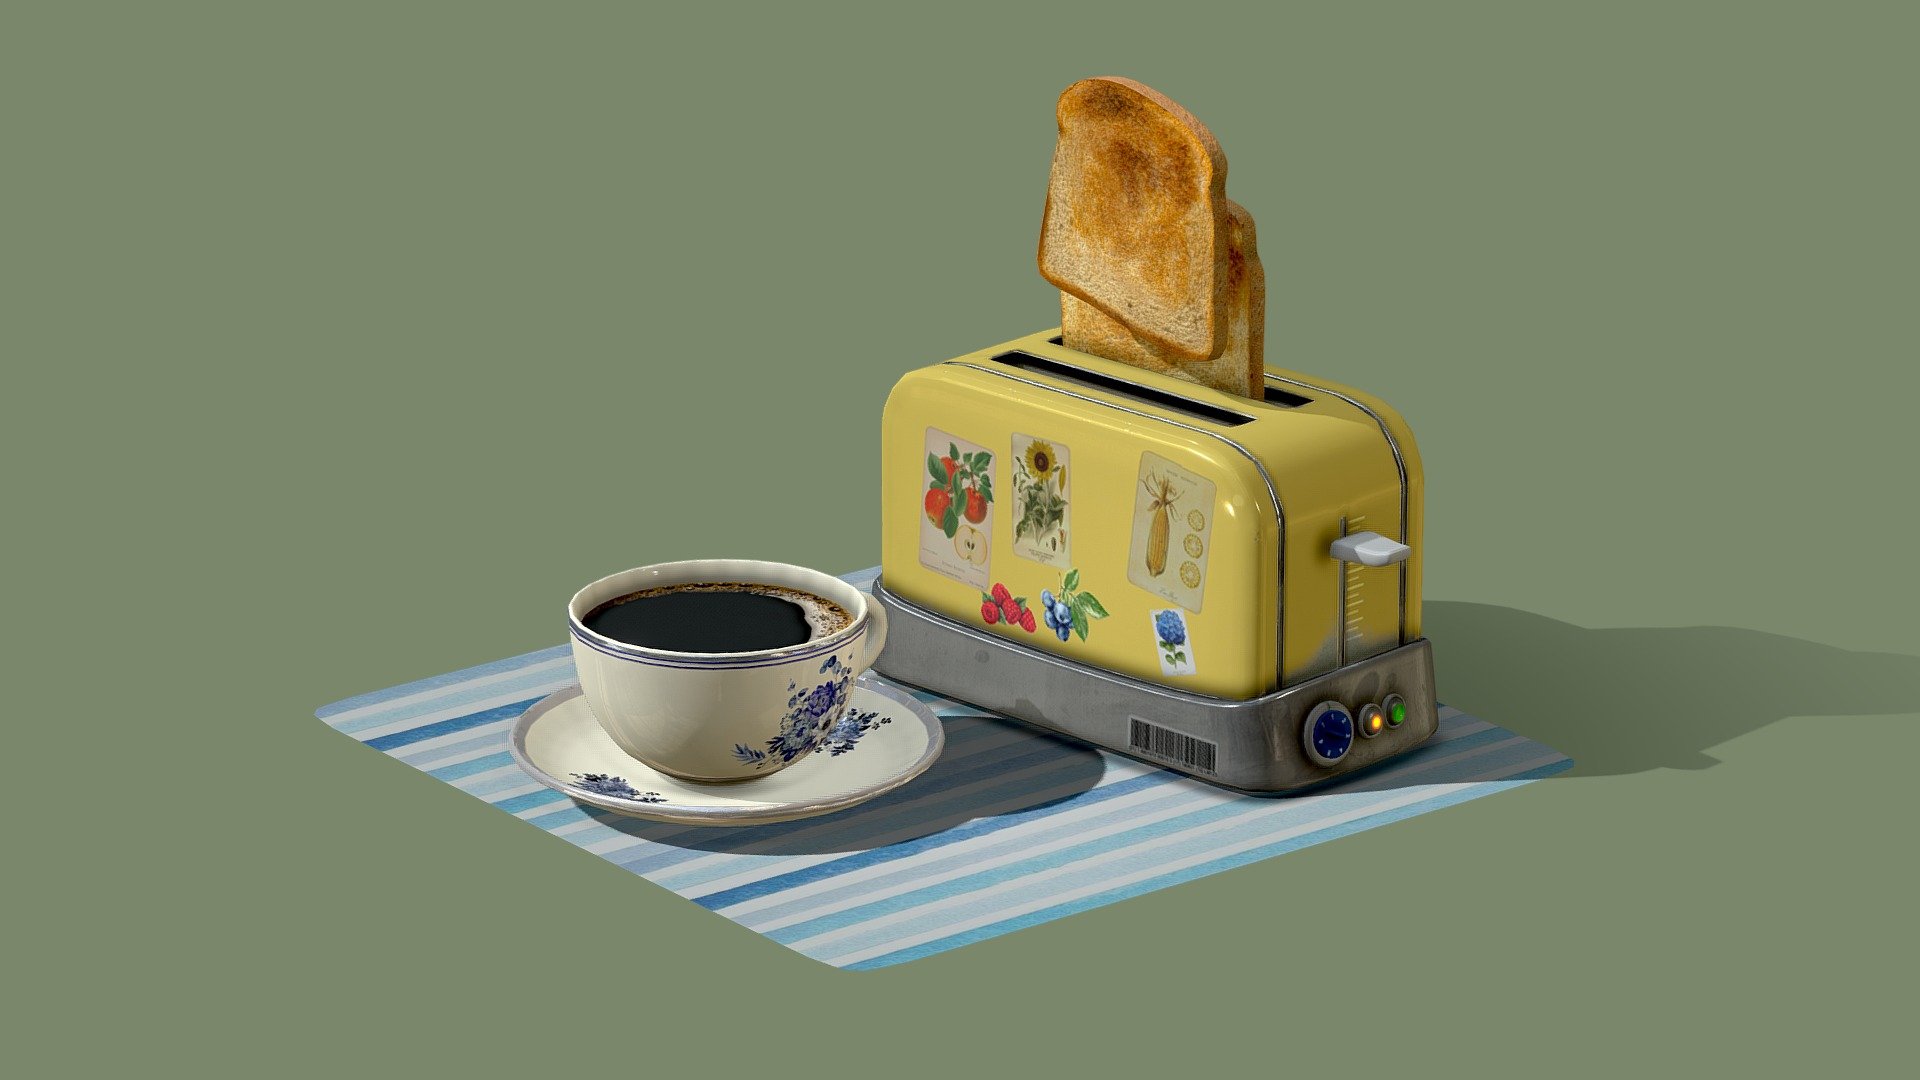 coffee cup and toasts. created in 3ds max . Animated with dummies. 3ds max Vray (2020) and Maya Arnold (2020) files included, also 4096 texture files 3d model